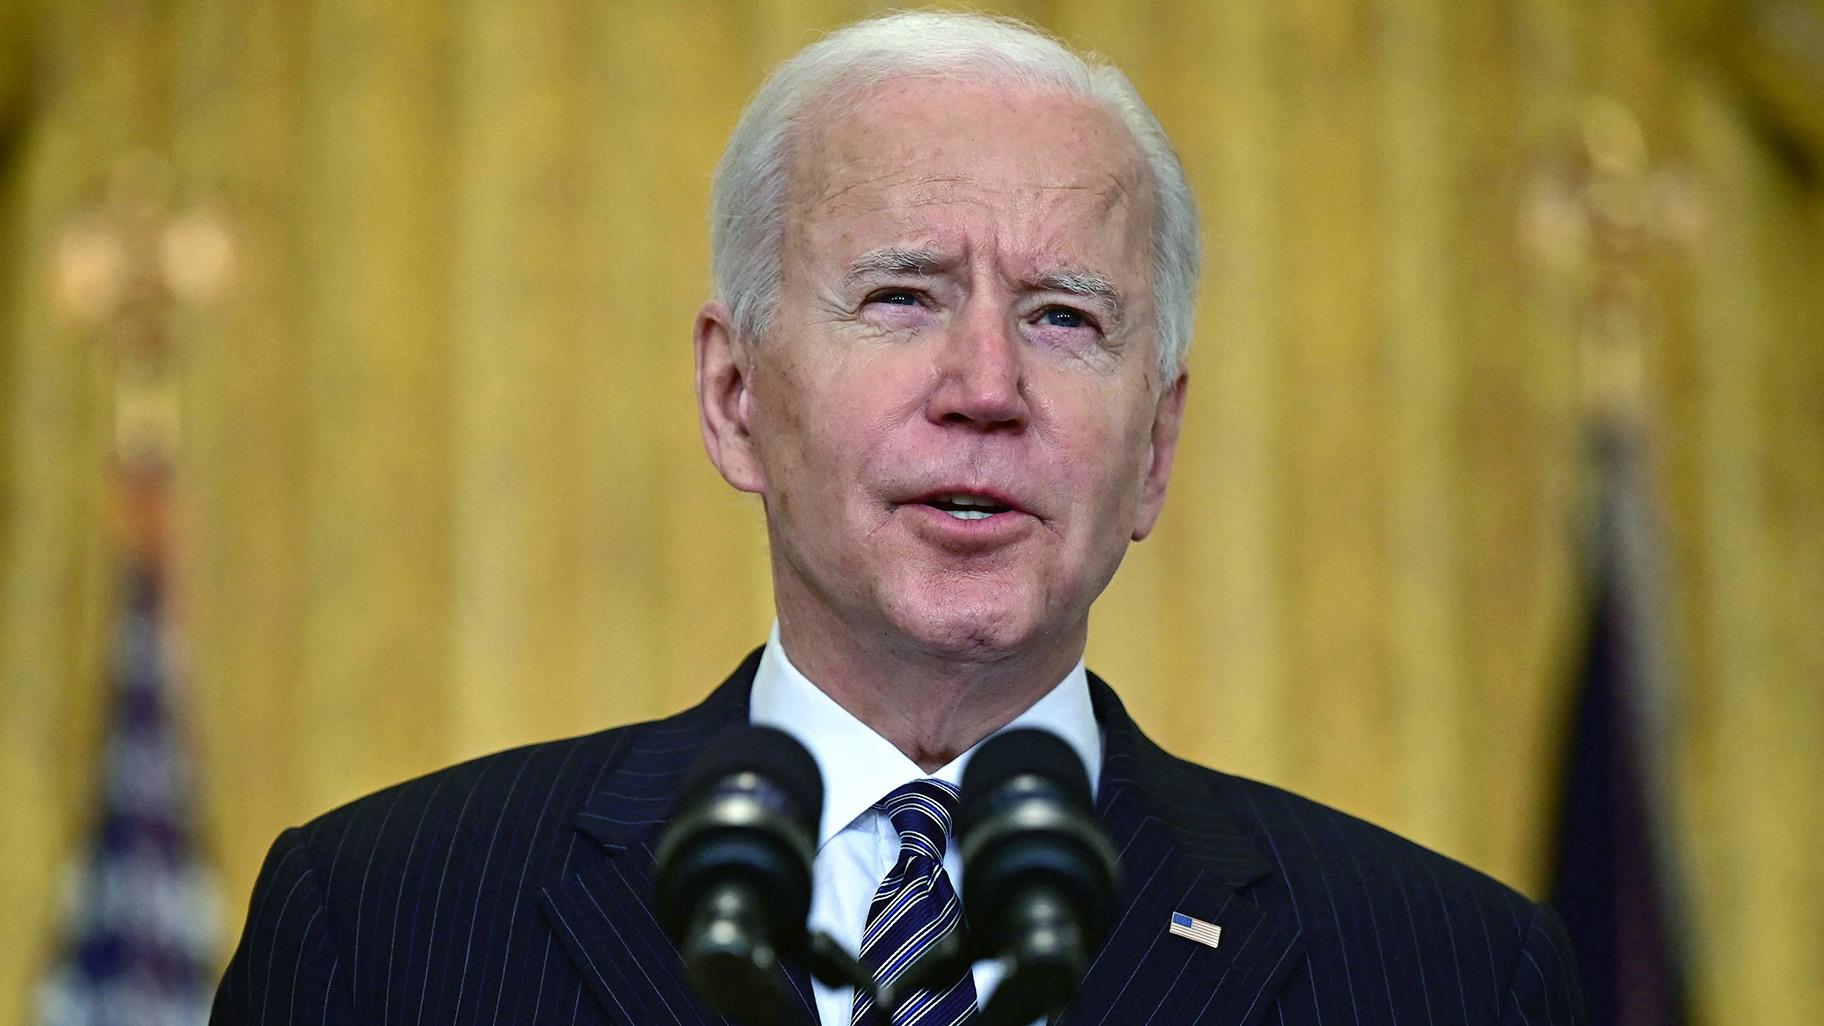 President Joe Biden and Vice President Kamala Harris traveled to Atlanta on Friday to meet with Asian American leaders in the wake of deadly shootings that killed eight people, including six women of Asian descent. (Jim Watson / AFP / Getty Images)